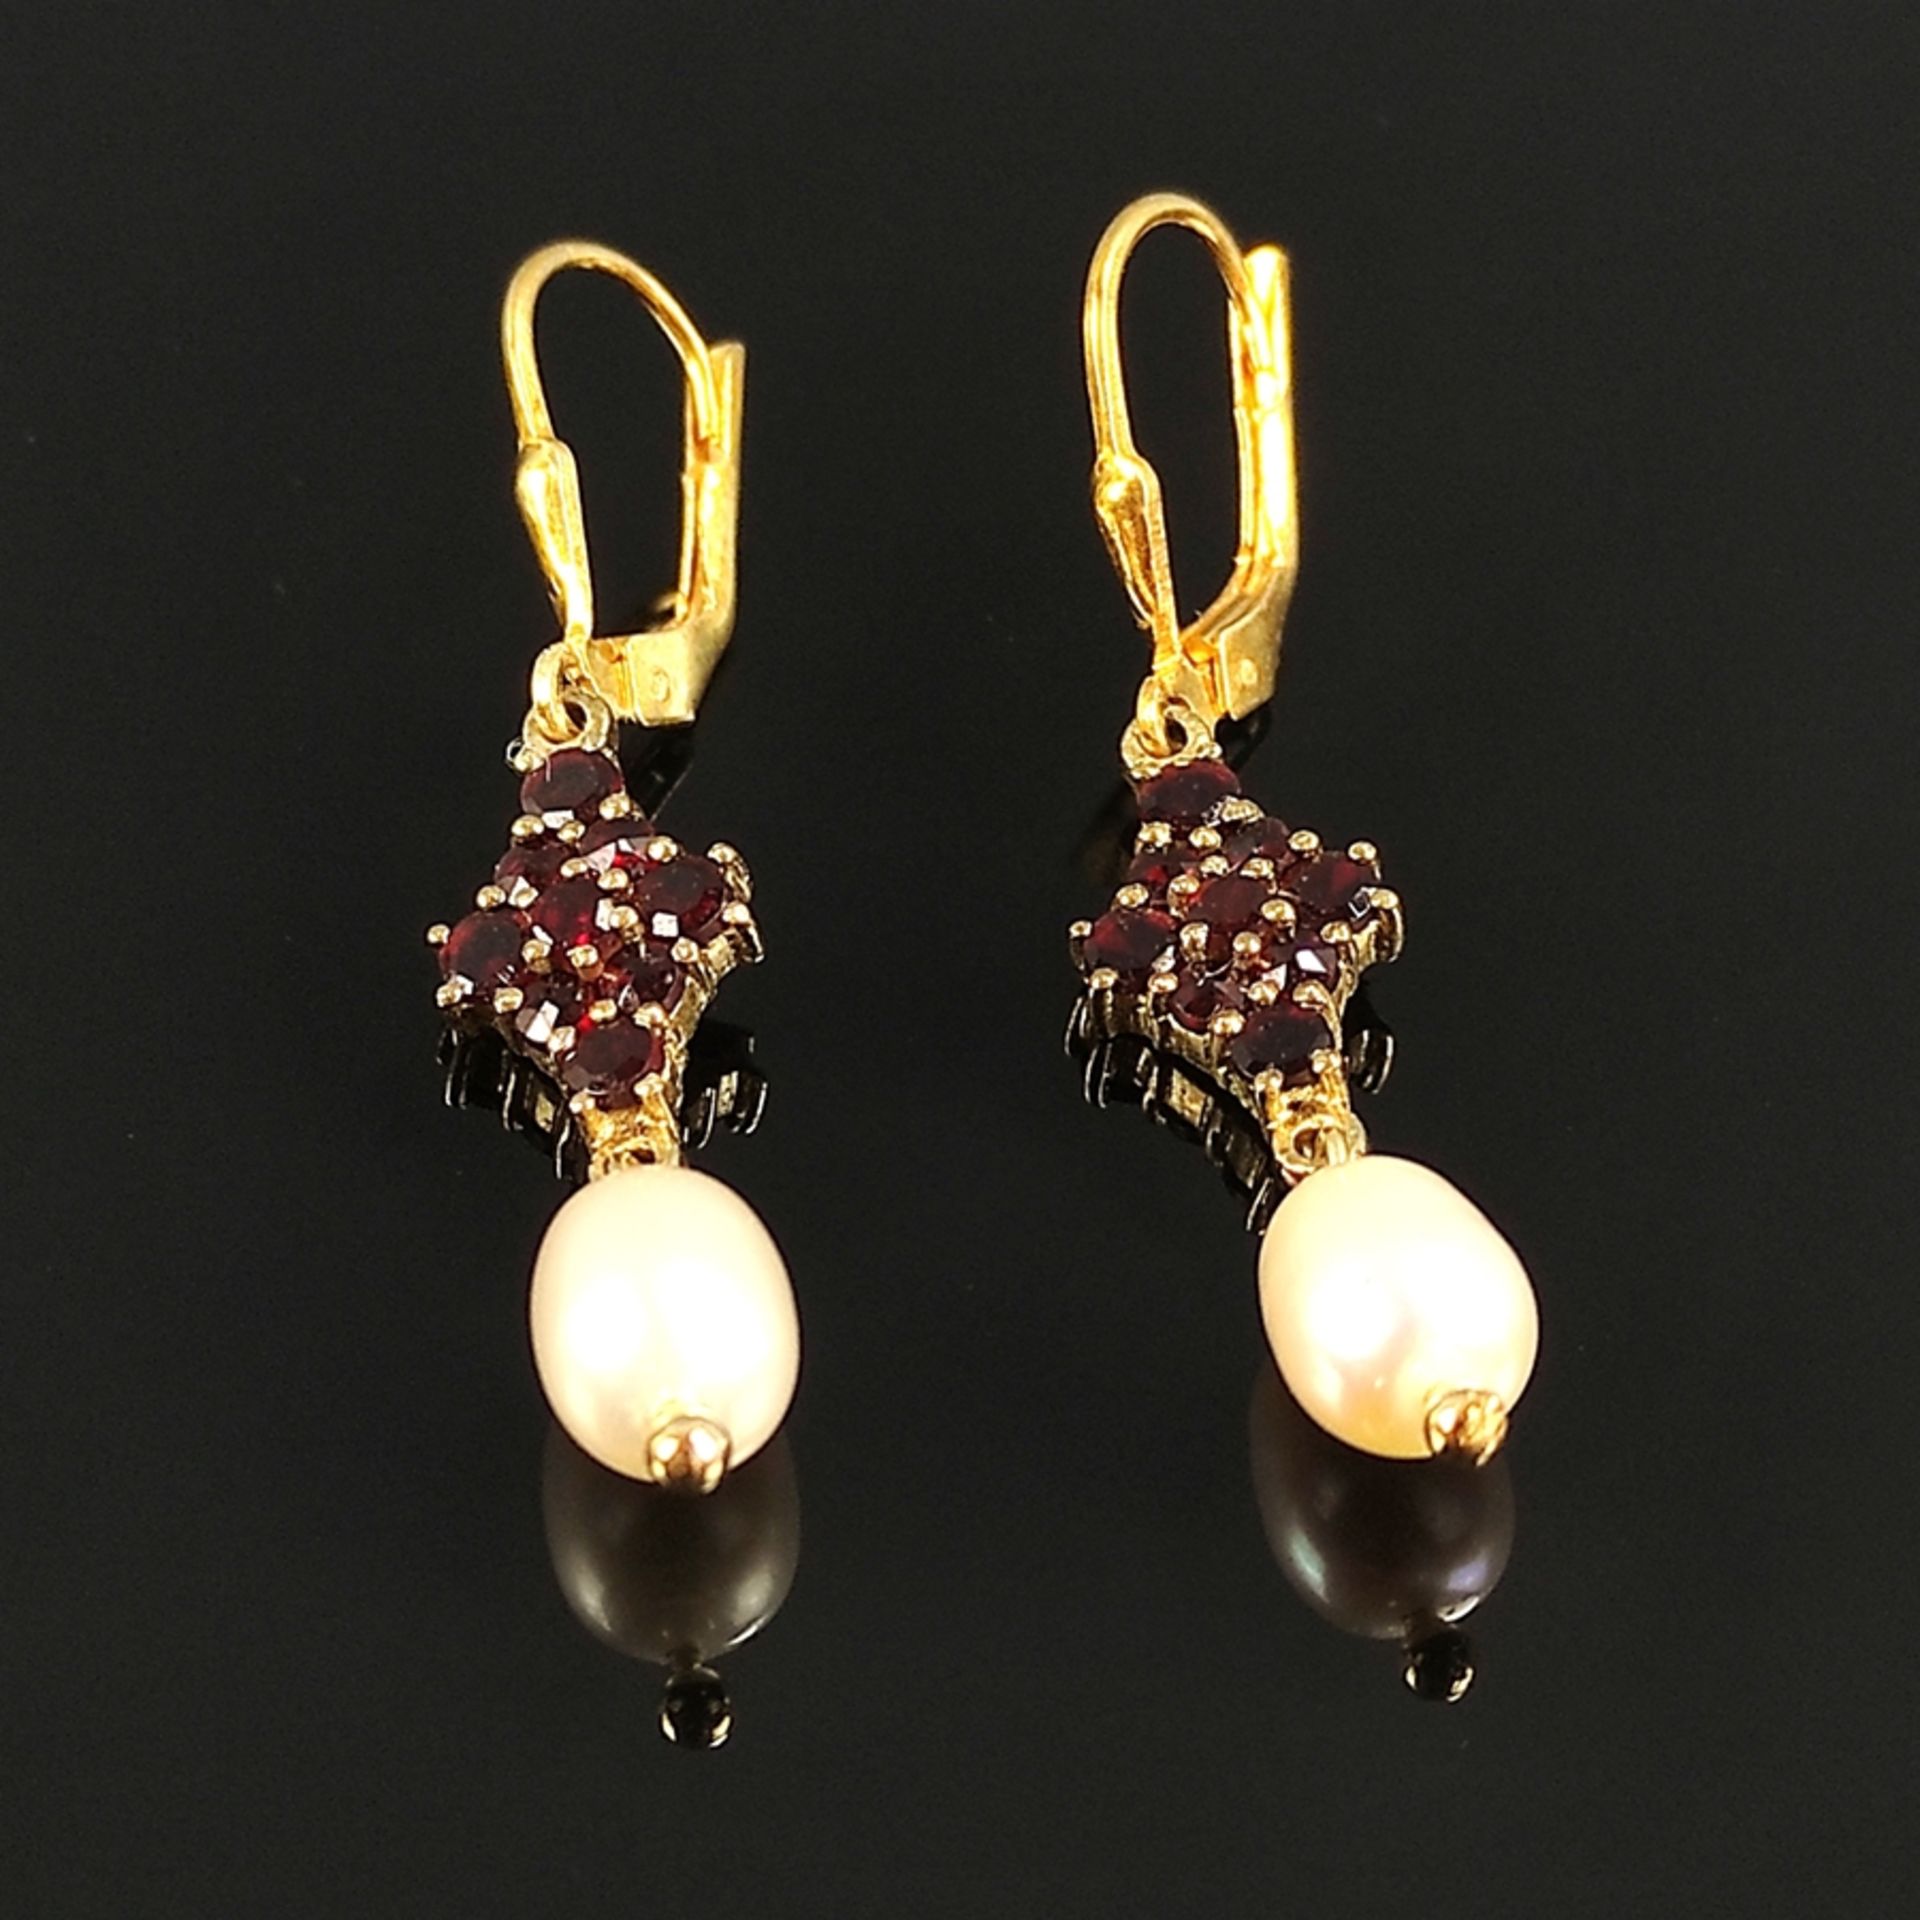 Garnet pearl earrings, silver 925 in 333/8K yellow gold plated, 3,7g, hinged earwire with diamond s